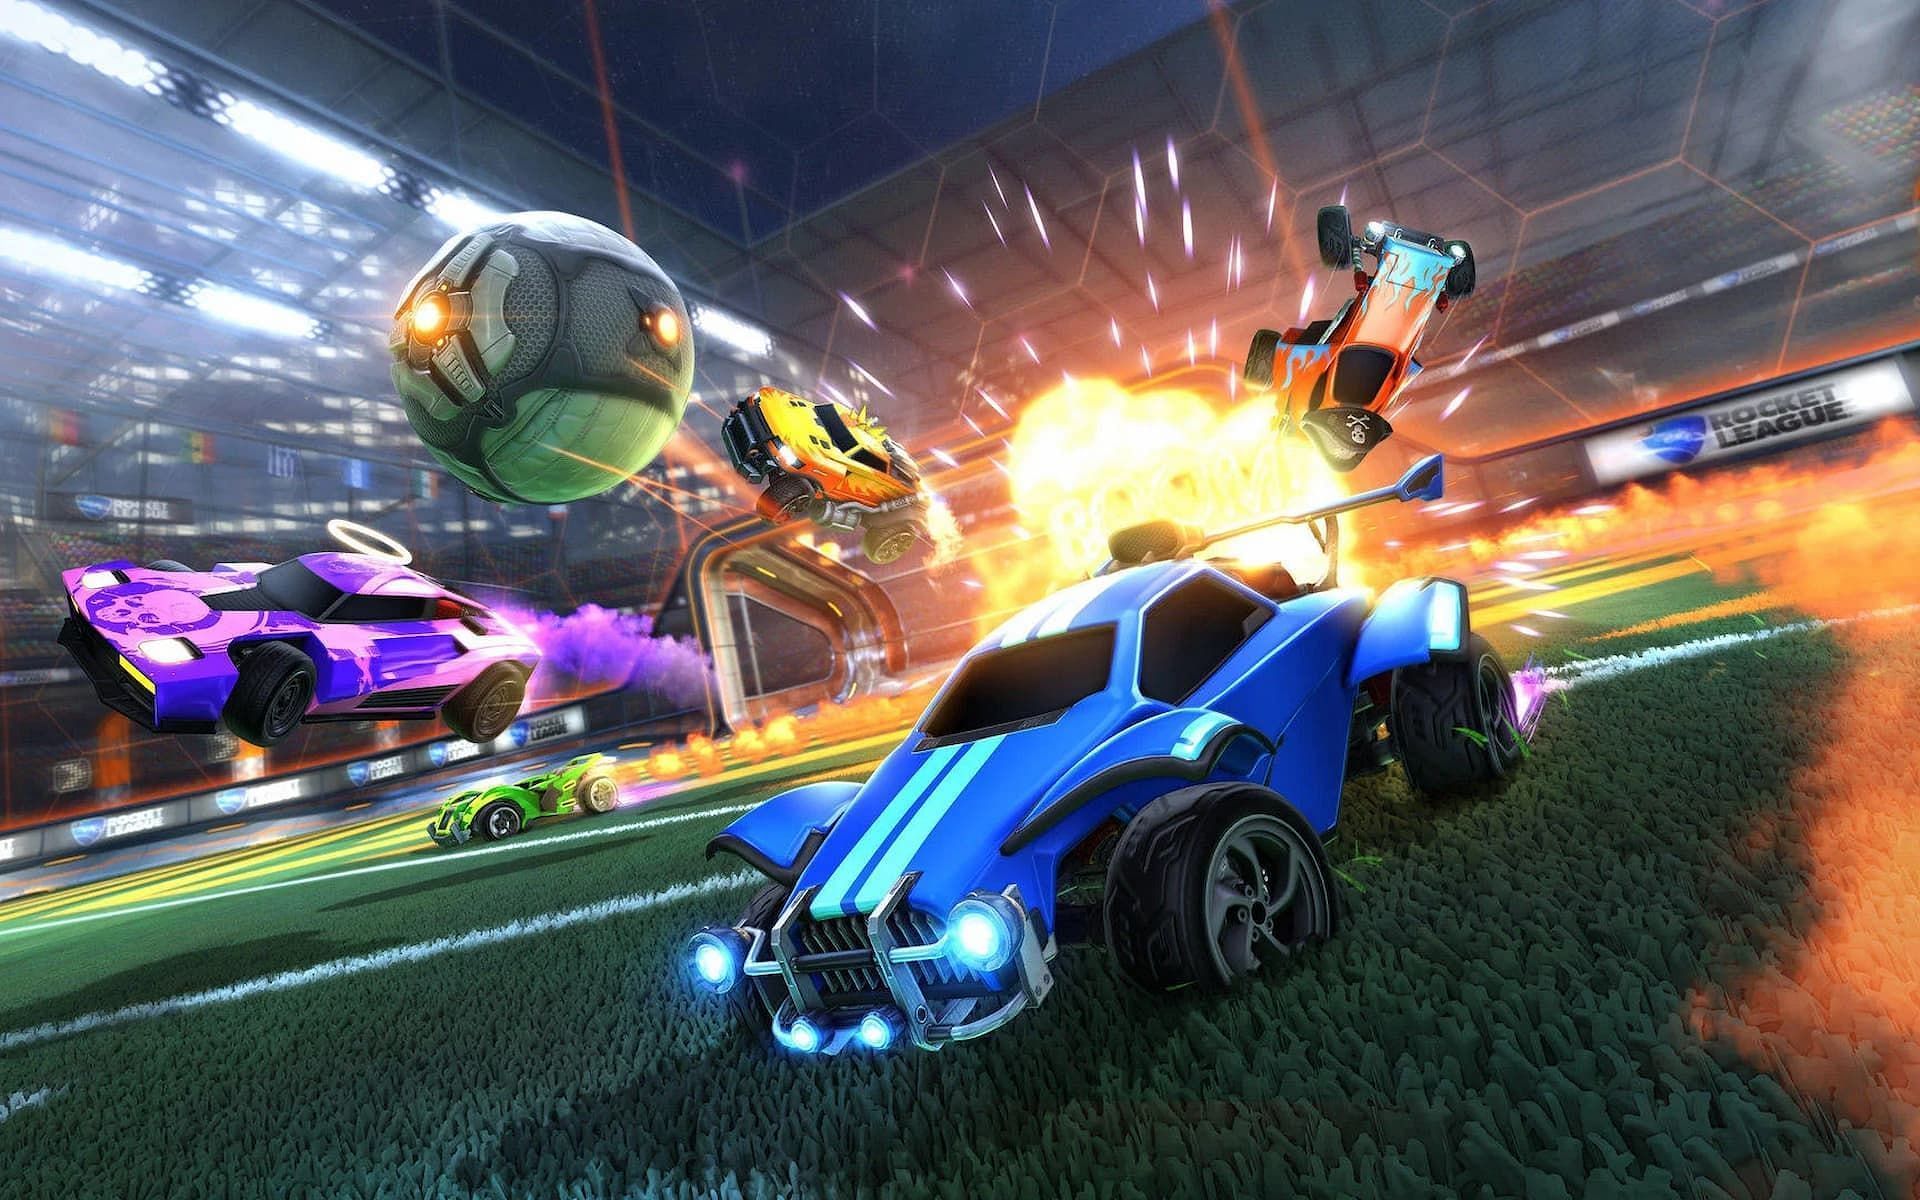 Rocket League is still taking the casual and competitive gaming world by storm (Image via Psyonix)